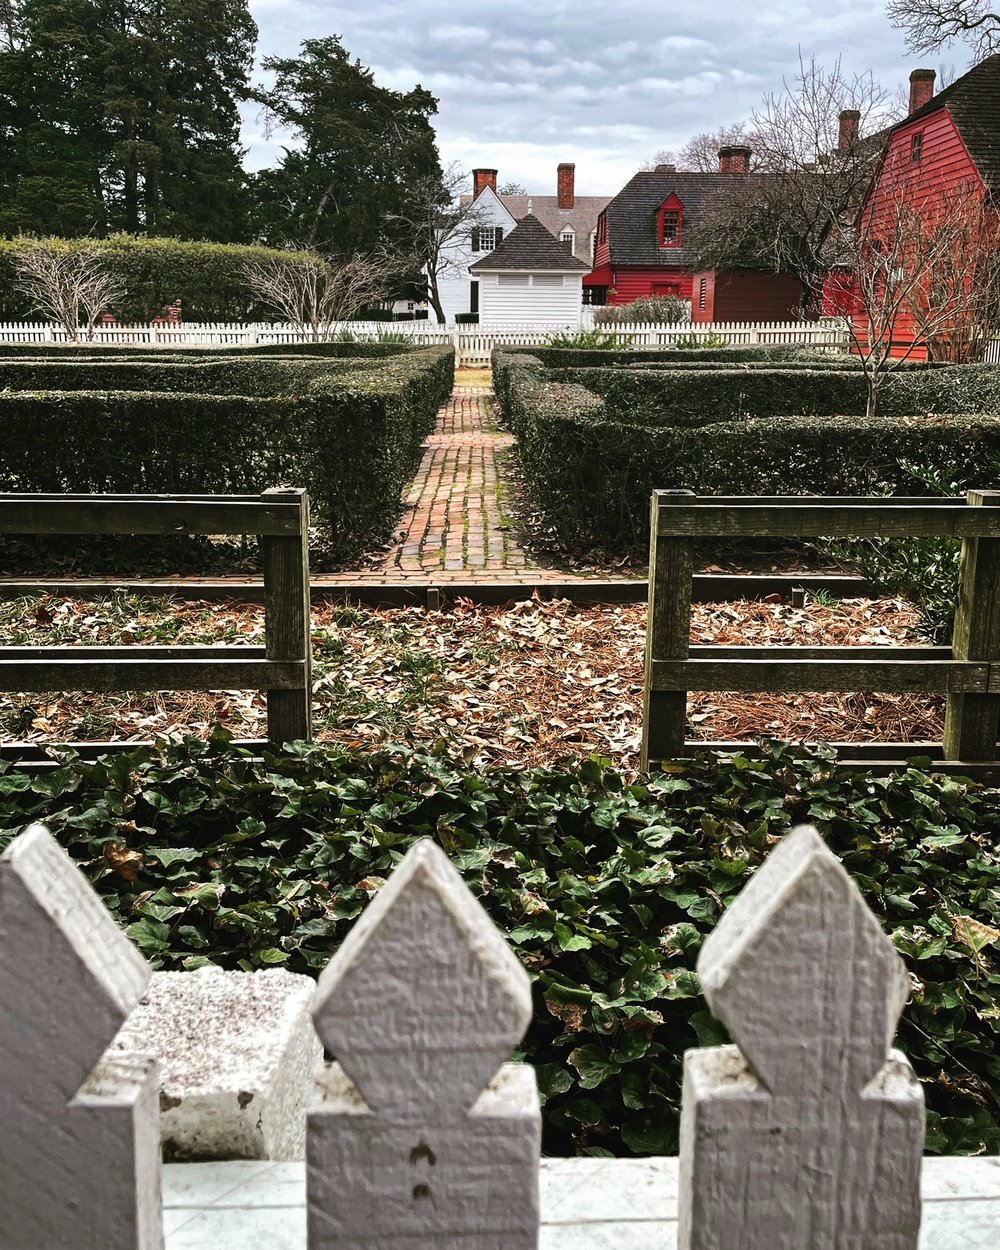  Designer James Amaya stopped in historic Williamsburg, Virginia while visiting family on the East Coast.  